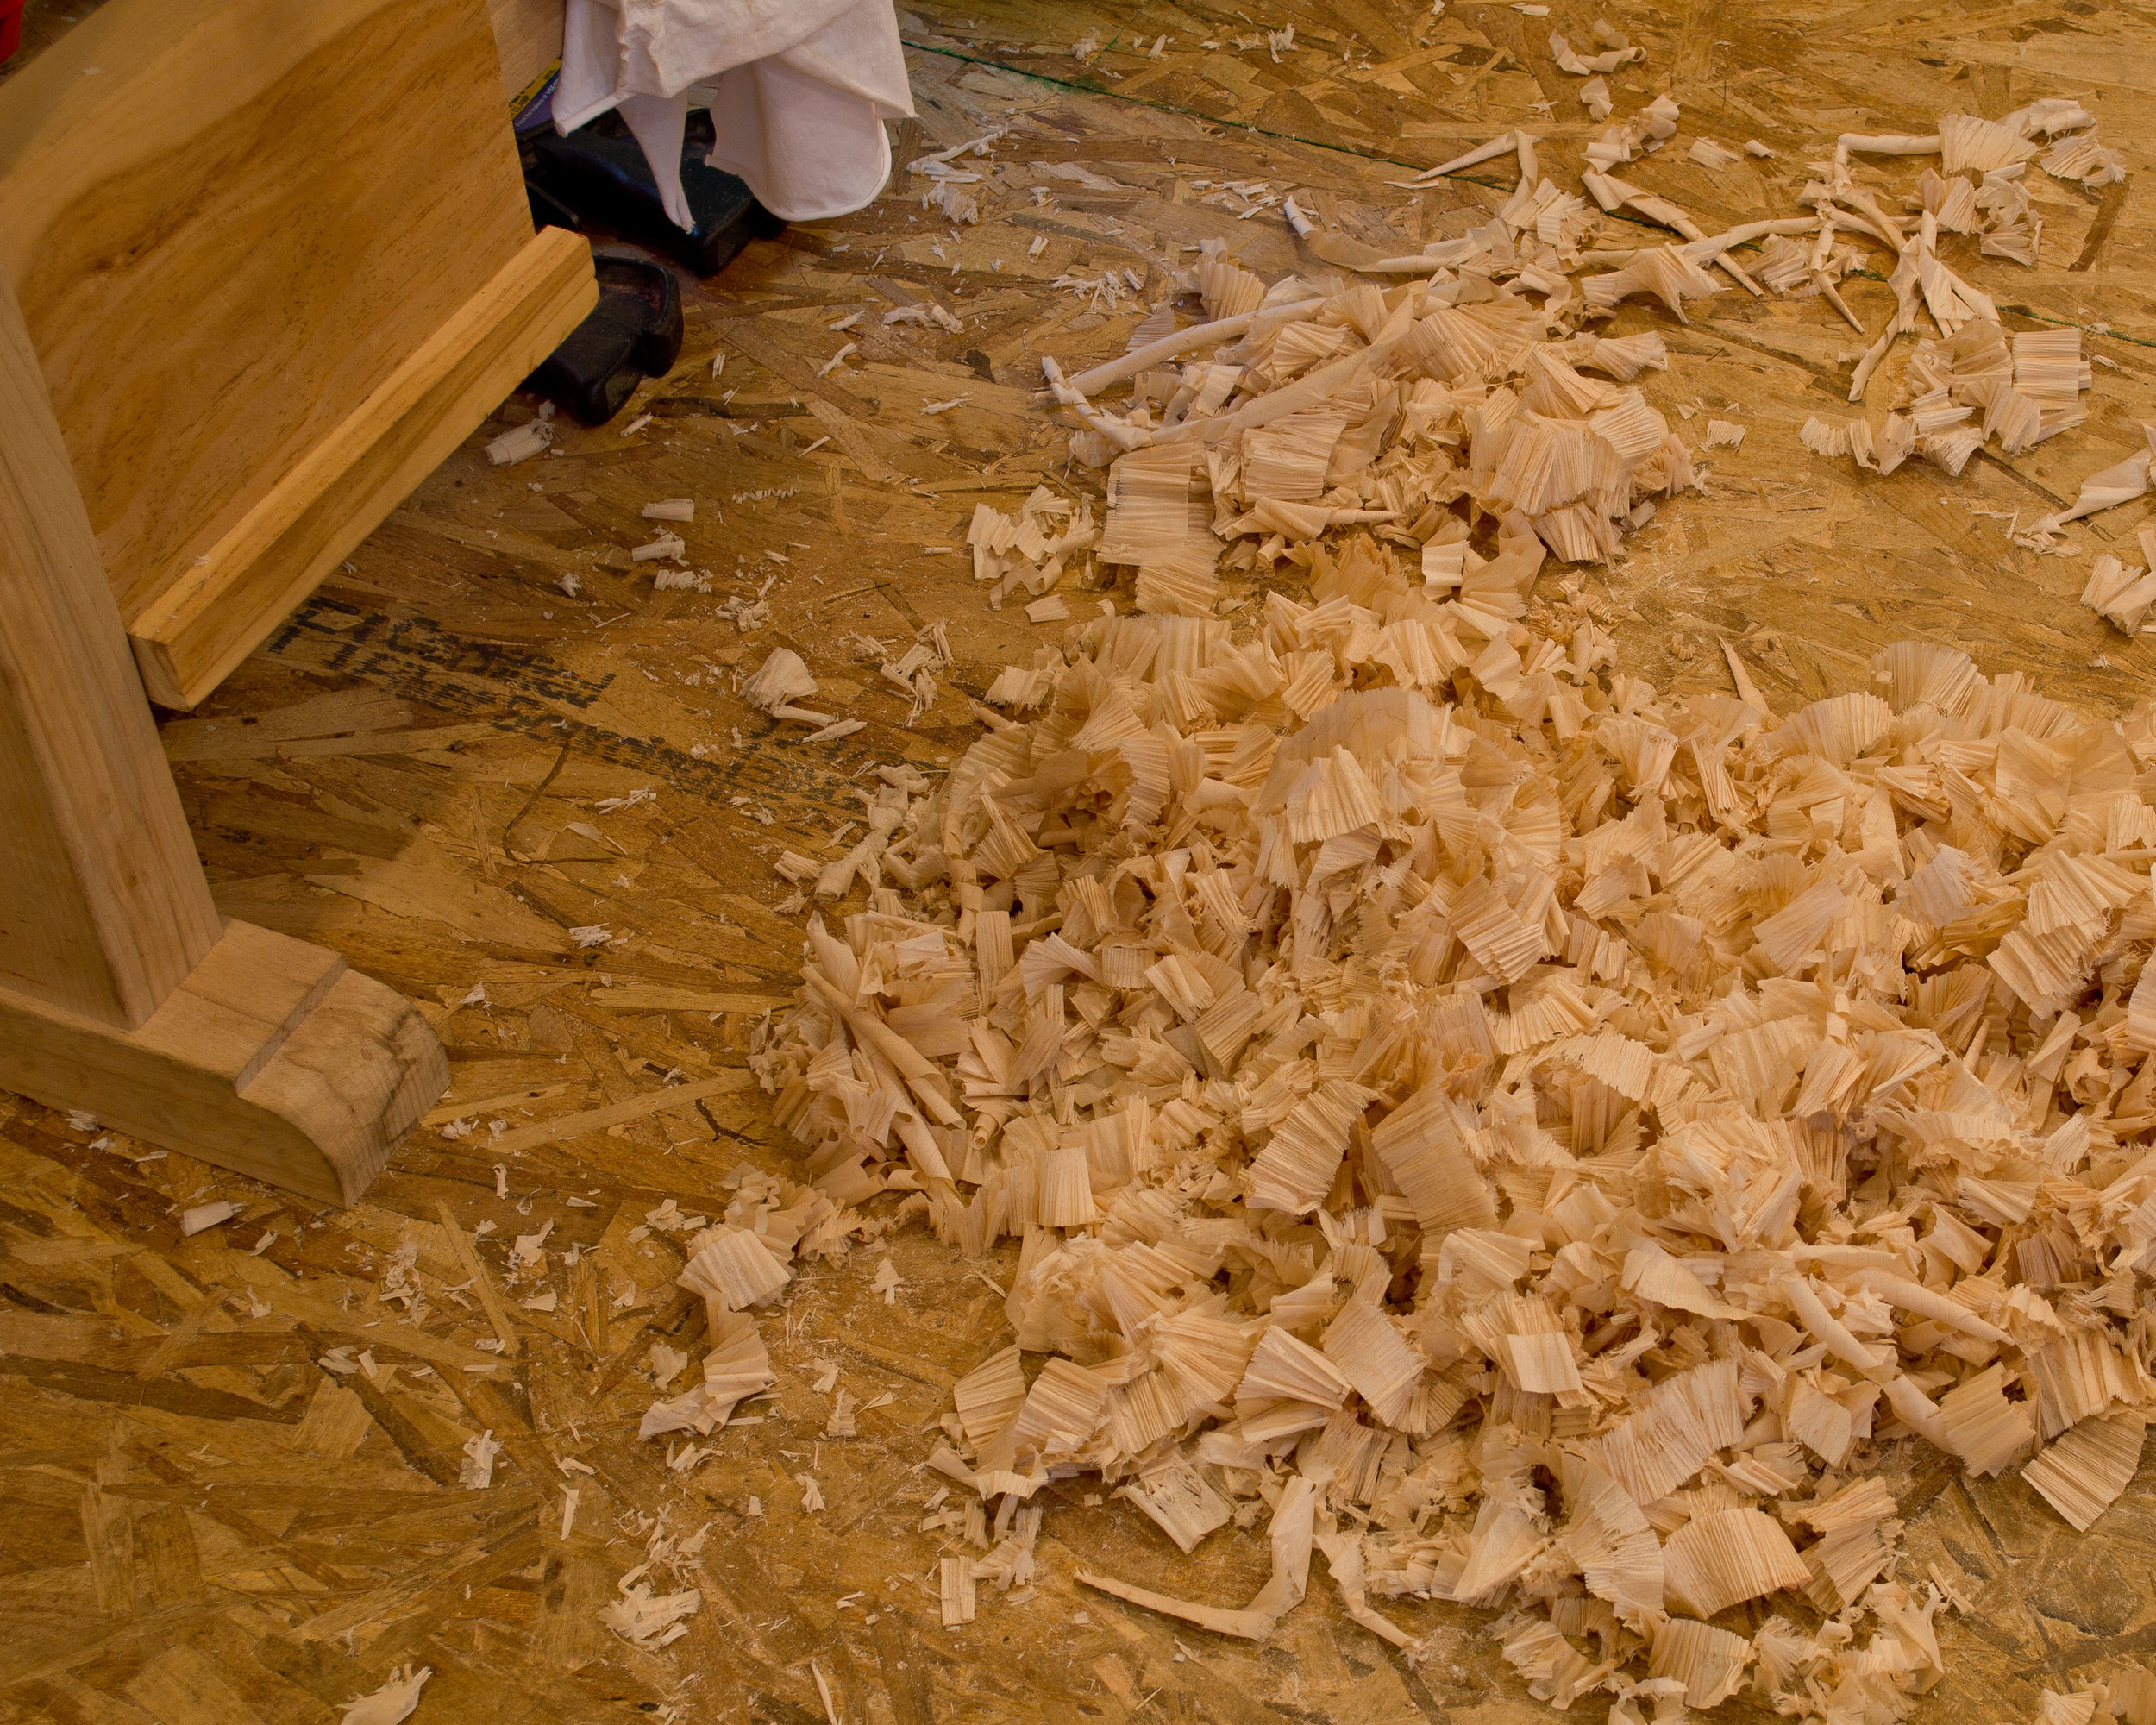  Shaping like this creates lots of hand plane shavings. &nbsp;But I'd much prefer these wispy shavings to the dust and noise of trying to do this with machines. &nbsp;Plus this is a whole lot safer.&nbsp; 